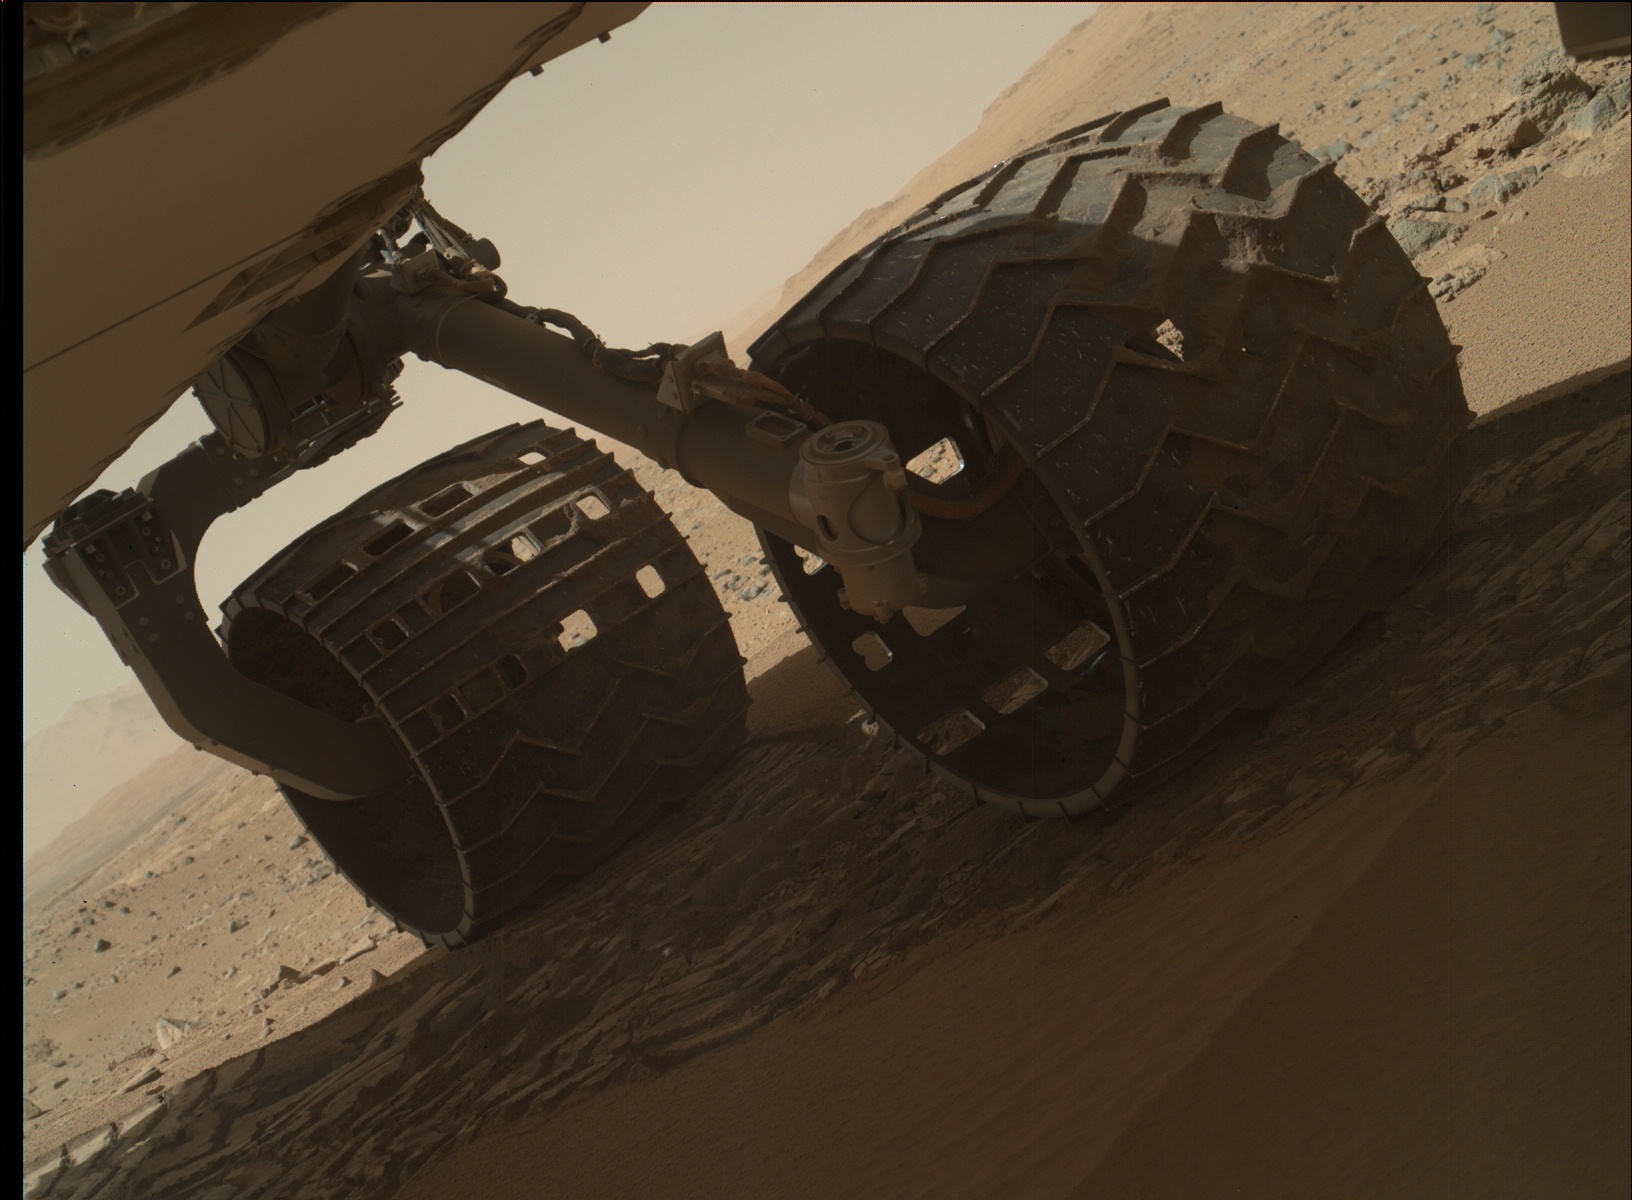 Nasa's Mars rover Curiosity acquired this image using its Mars Hand Lens Imager (MAHLI) on Sol 532, at drive 196, site number 26